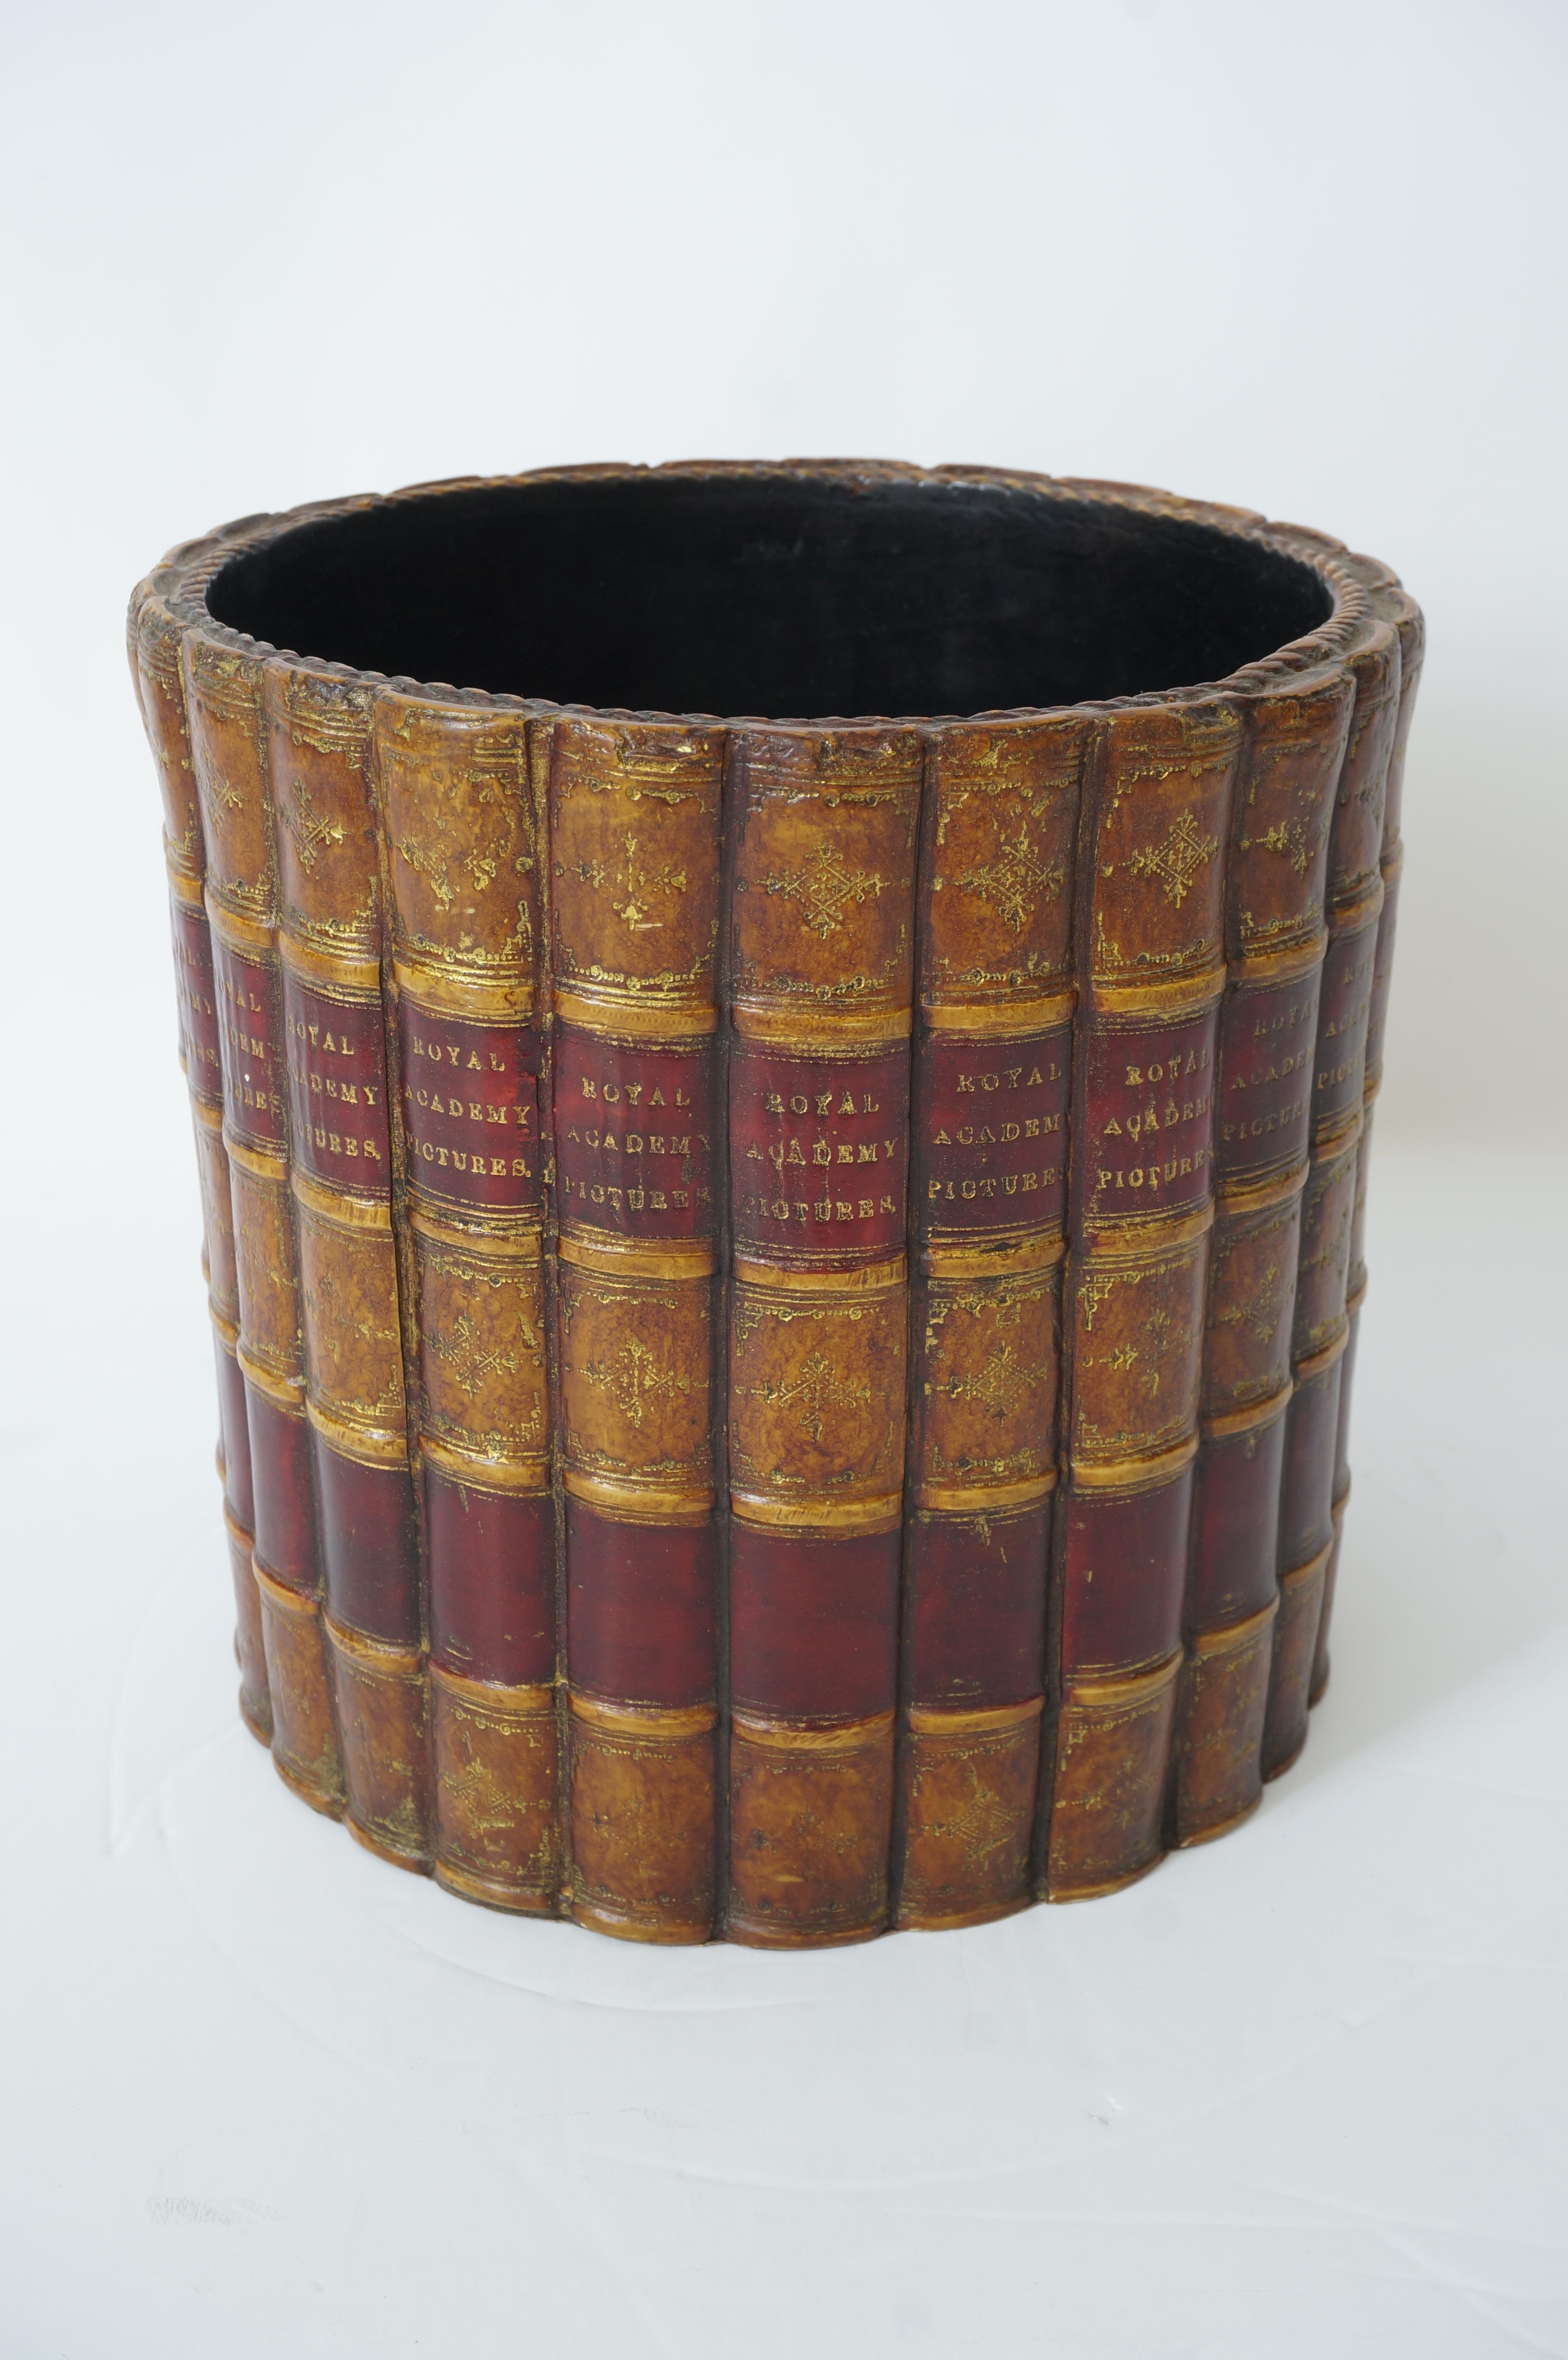 This stylish Edwardian inspired waste basket with its faux book spines are titled 